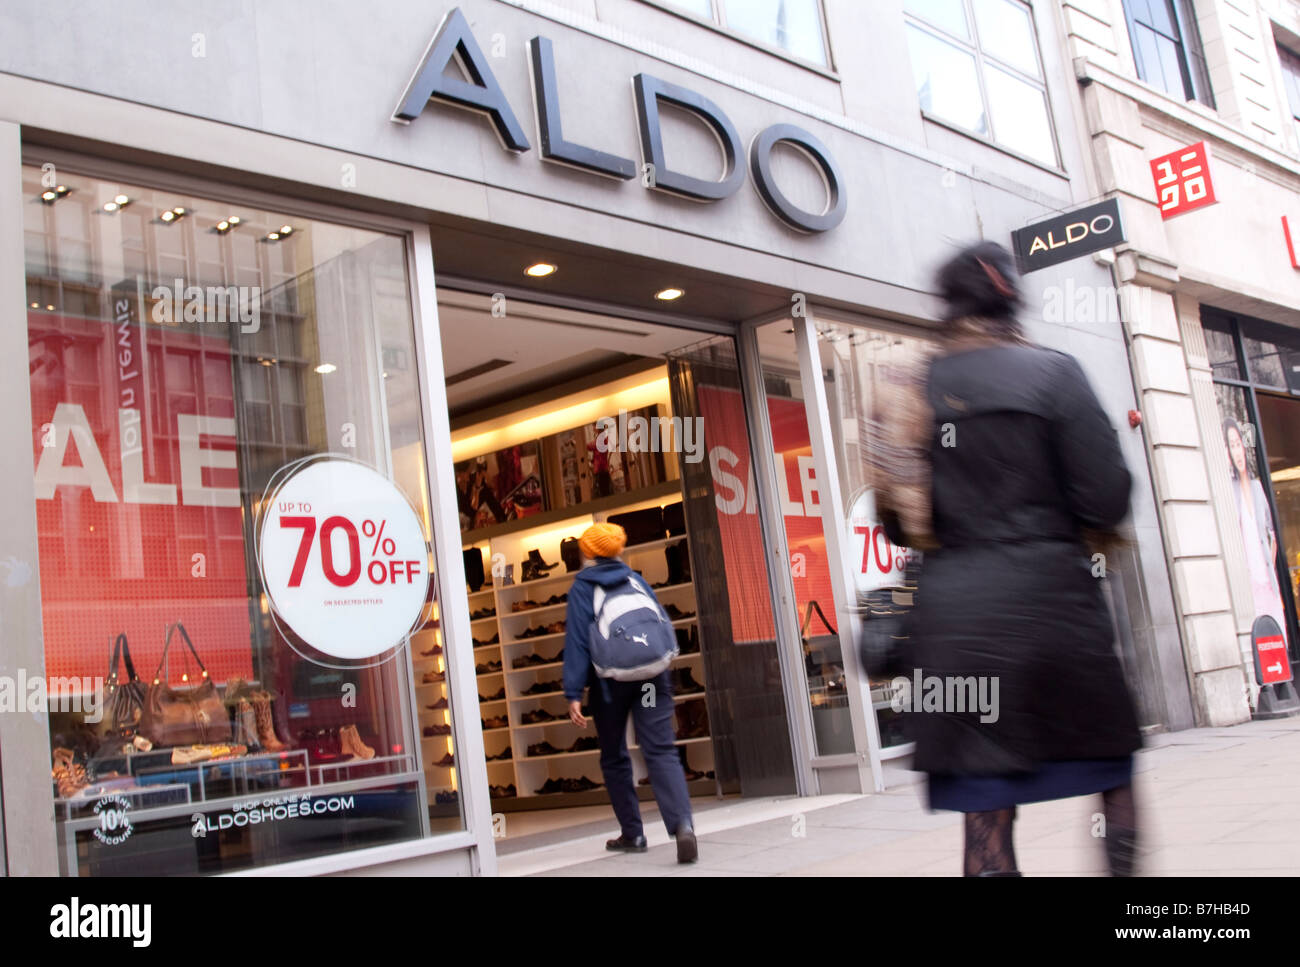 Aldo Store Front High Resolution Stock Photography and Images - Alamy